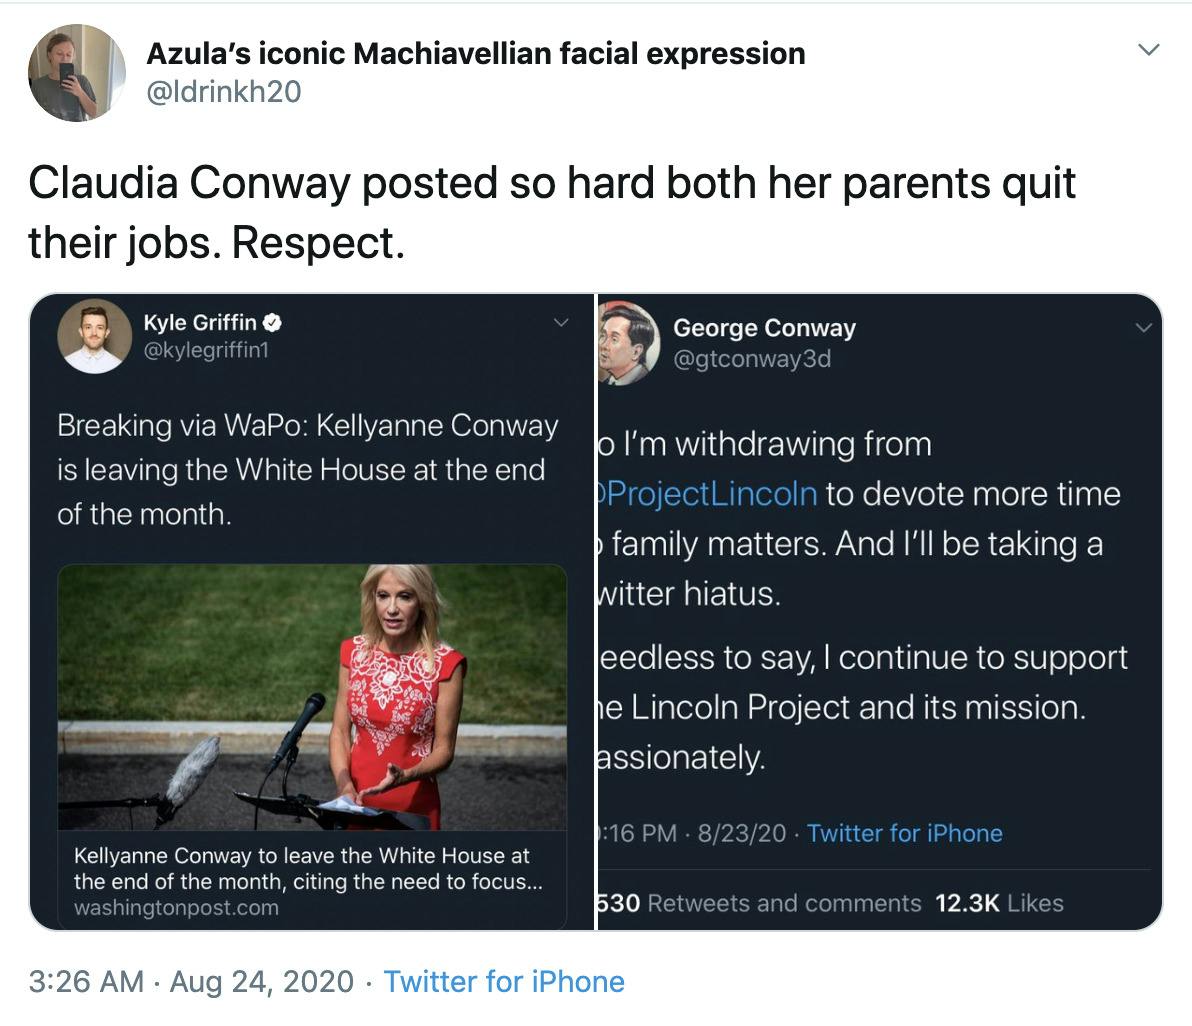 "Claudia Conway posted so hard both her parents quit their jobs. Respect." Screenshots of both the parents resignation tweets